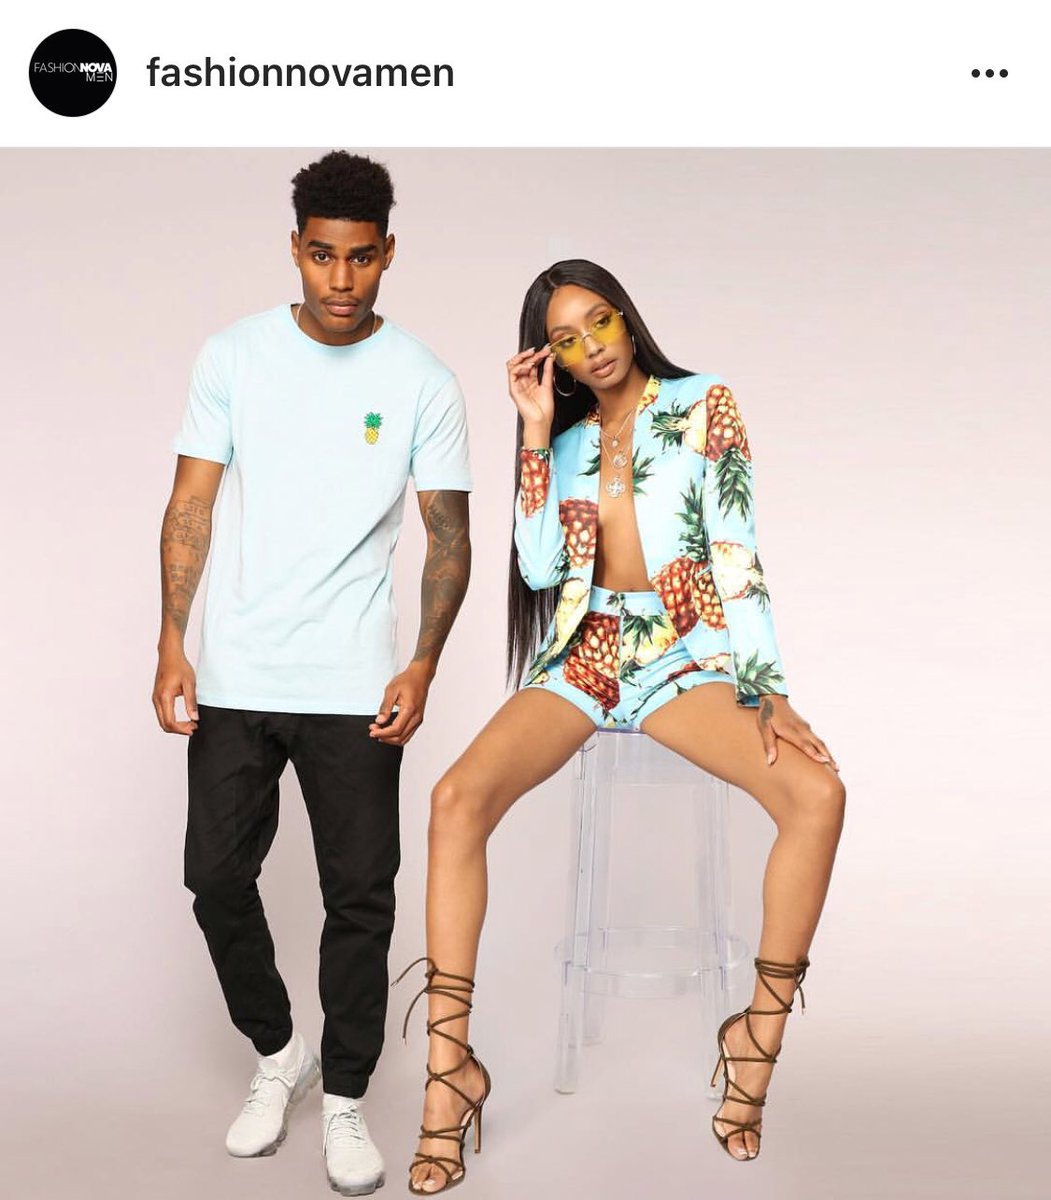 I think they misunderstood what we wanted... 

We wanted the men's version of what she has on. Big bold pattern. Showing skin. 2 piece matching set. Is that silk? Meanwhile, homeboy is rocking a t-shirt with a pineapple on it.